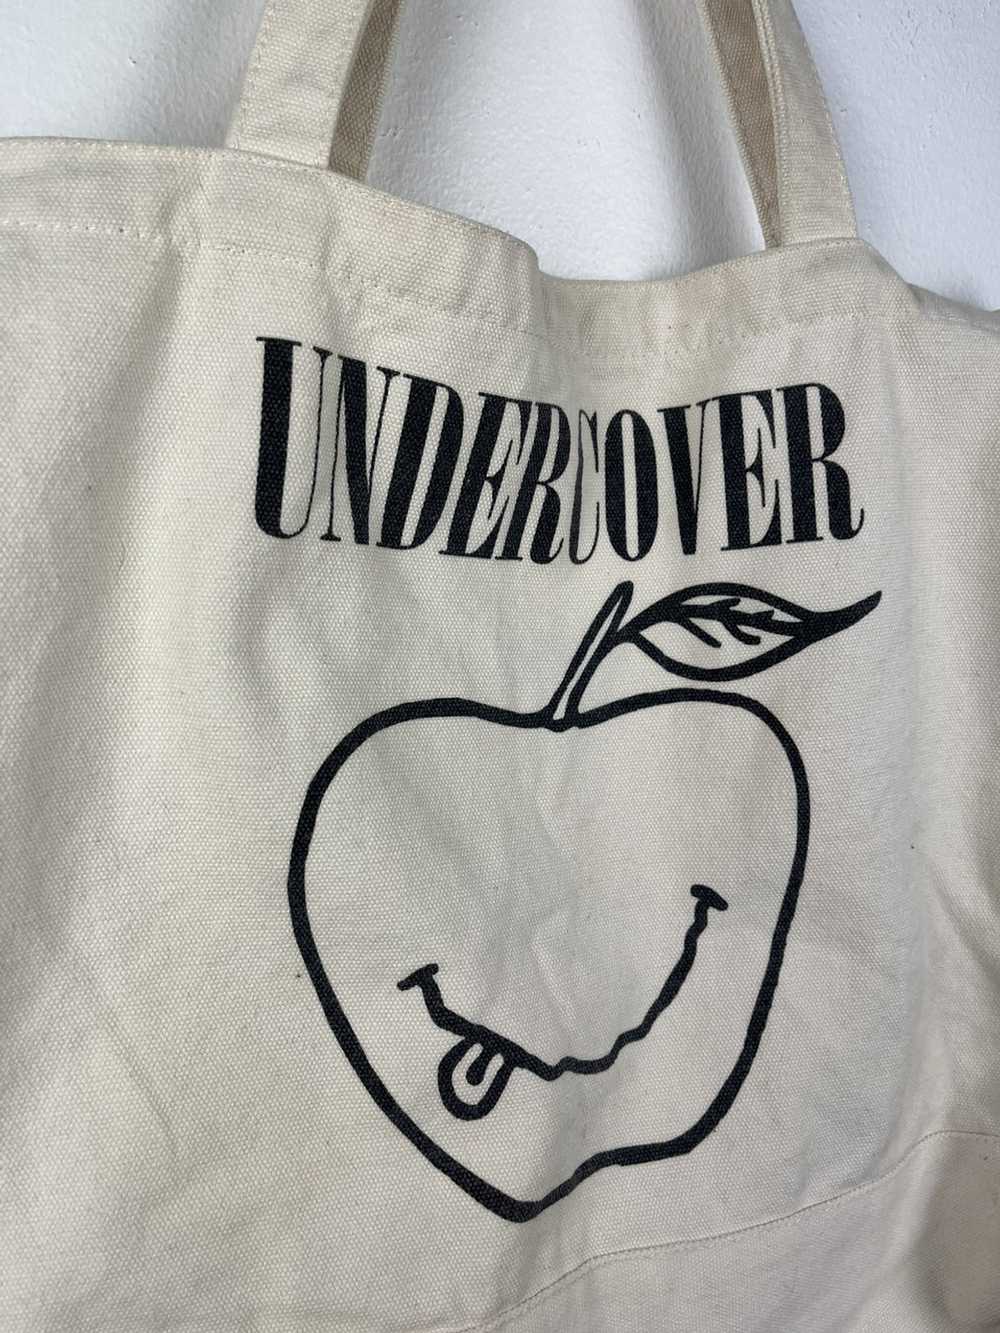 Undercover Undercover Apple Tote - image 2